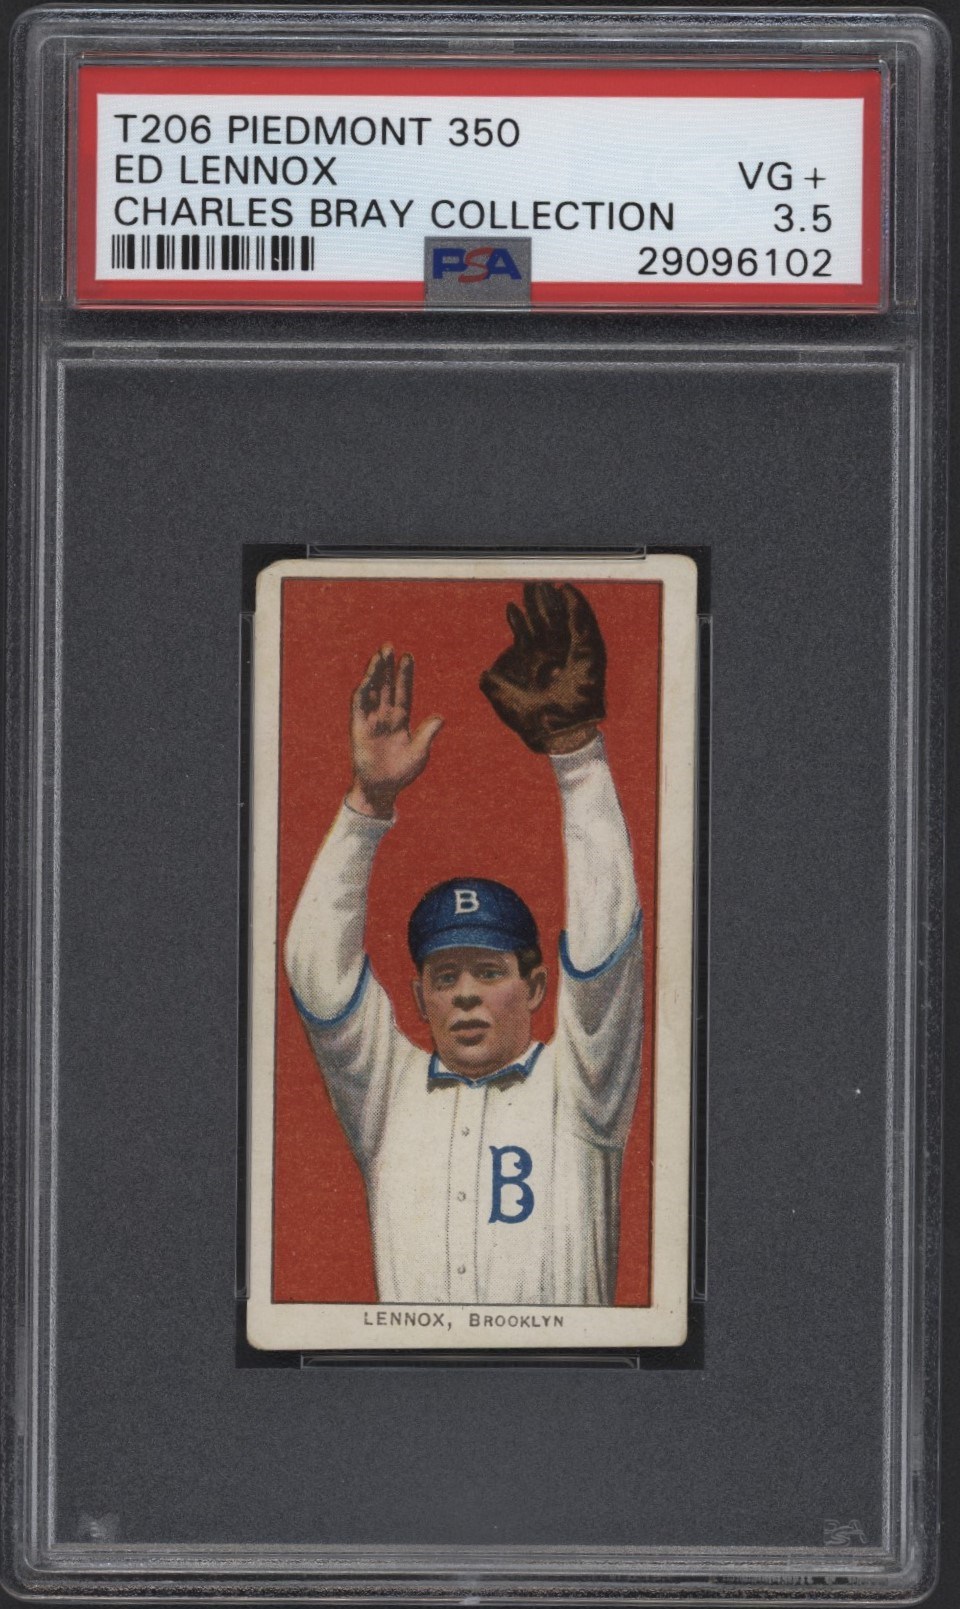 T206 Piedmont 350 Ed Lennox PSA 3.5 From the Charles Bray Collection